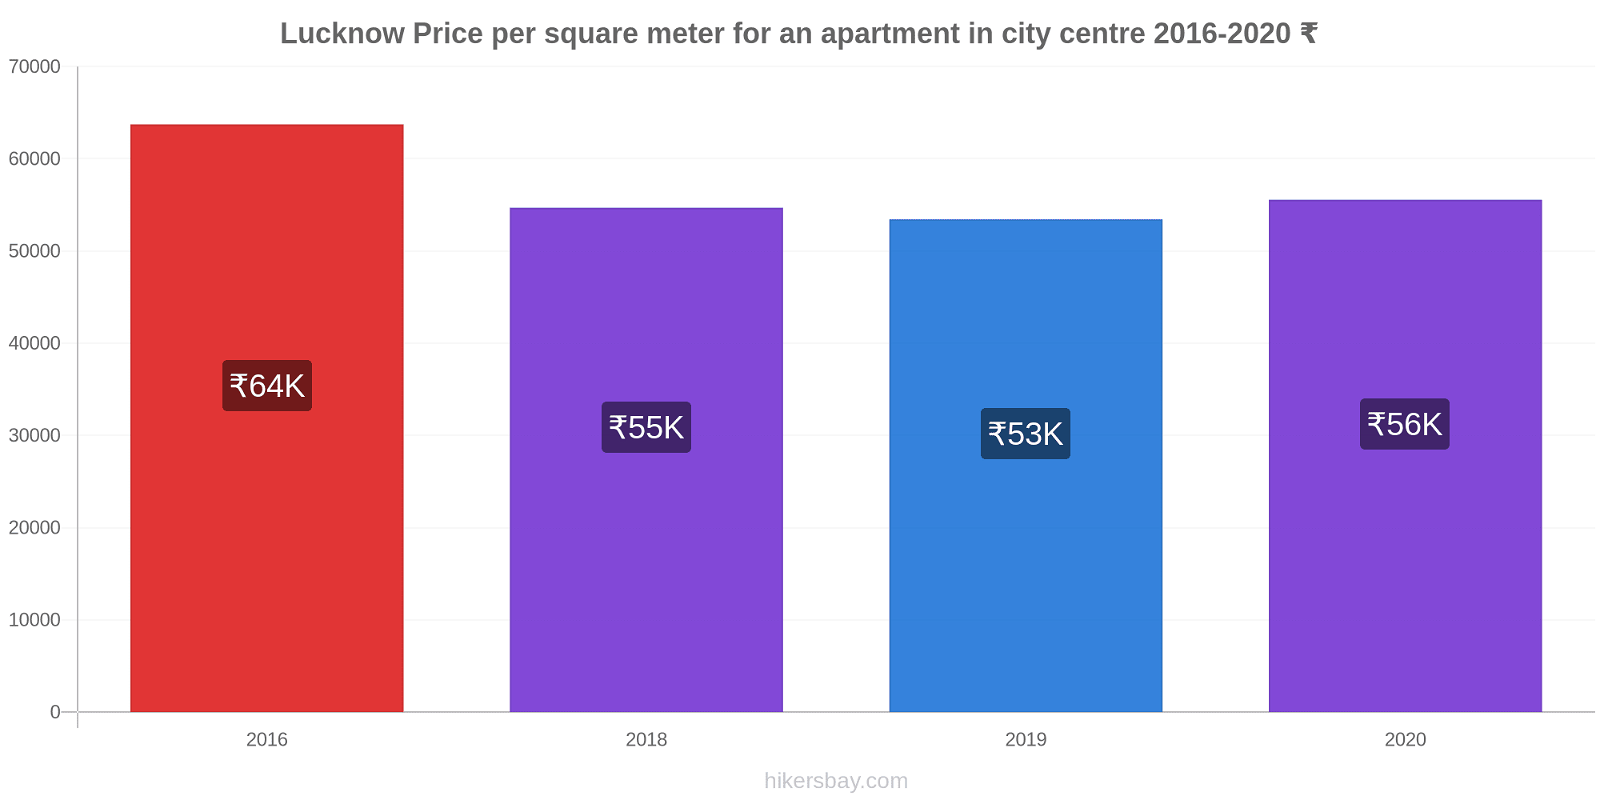 Lucknow price changes Price per square meter for an apartment in city centre hikersbay.com